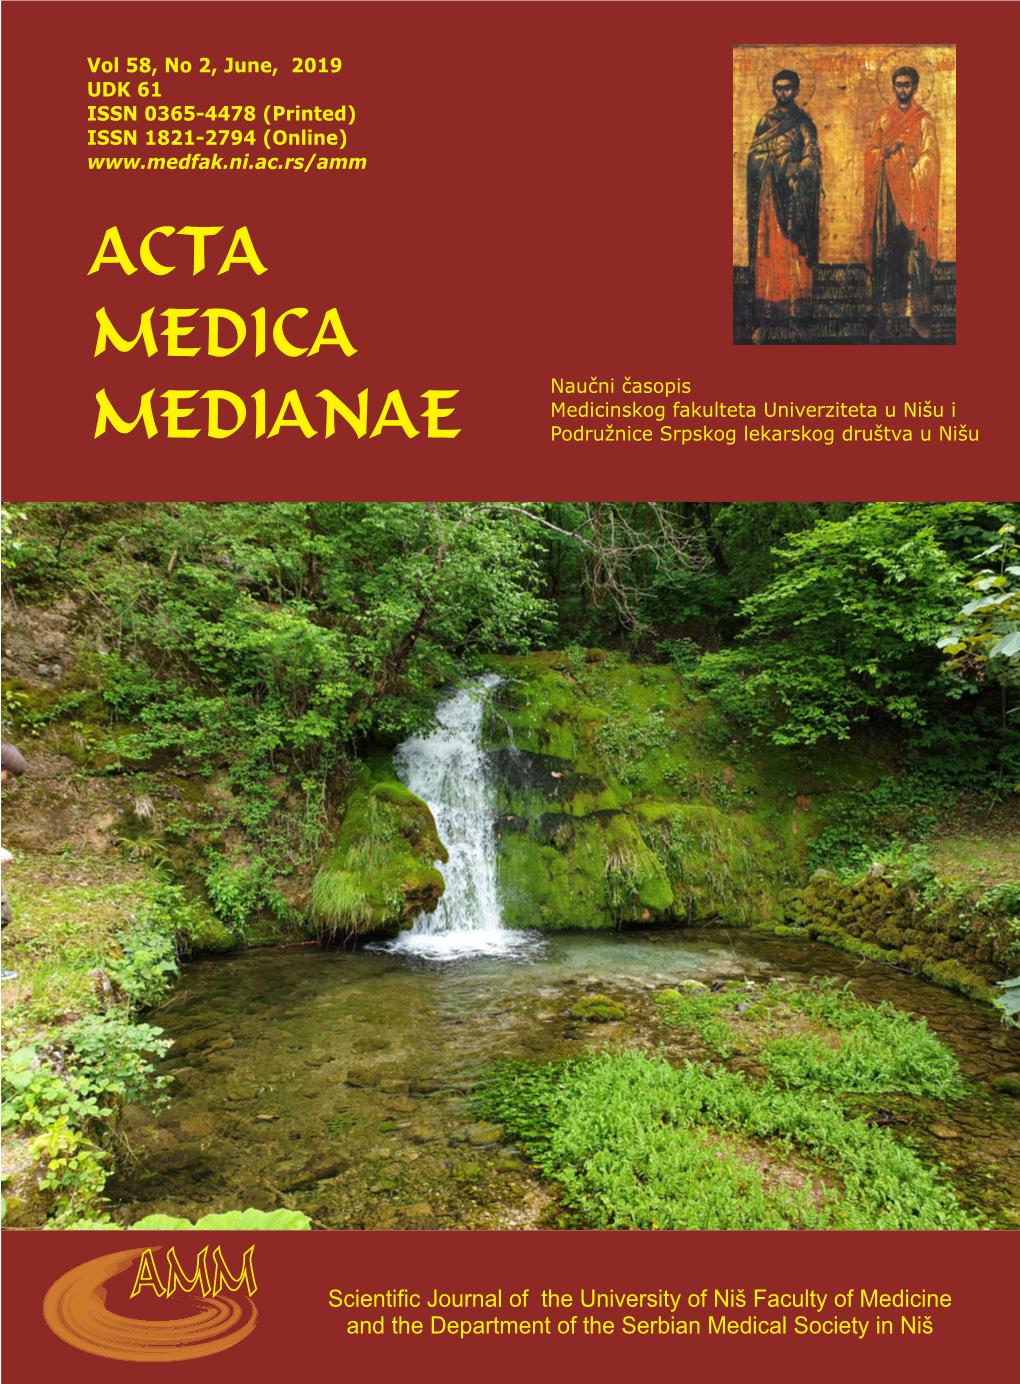 Scientific Journal of the University of Niš Faculty of Medicine and The